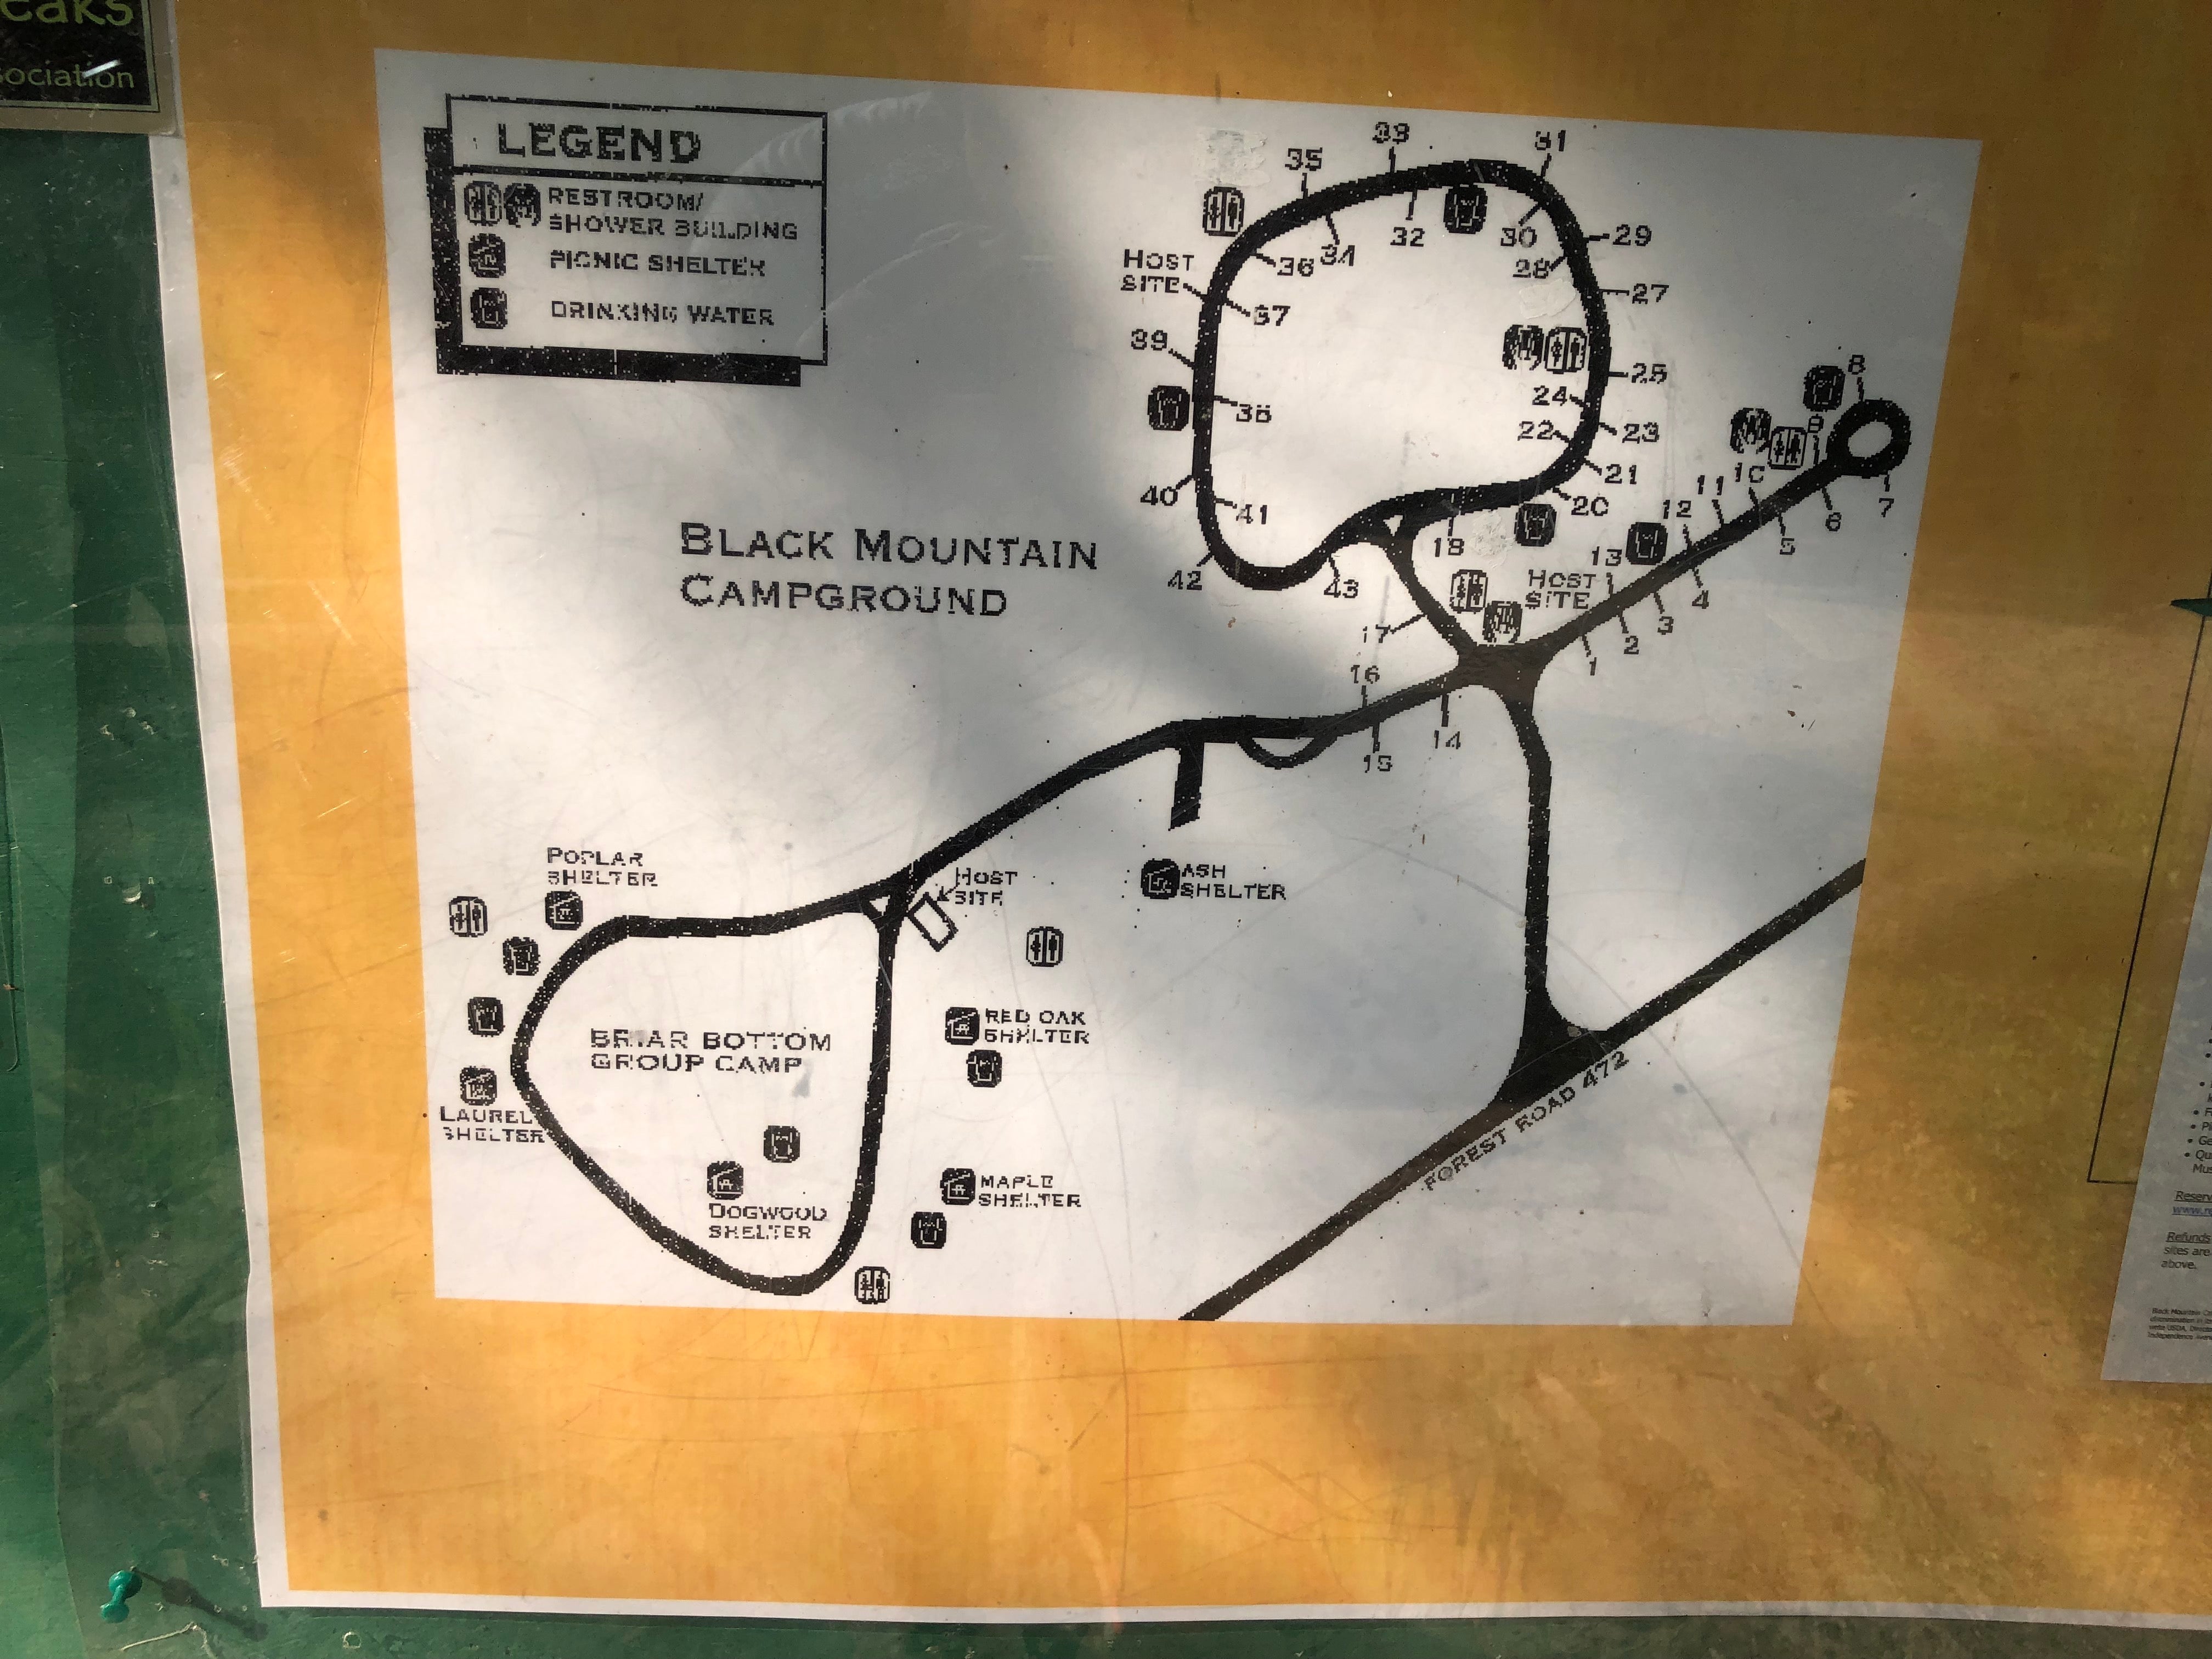 Map of the campground.